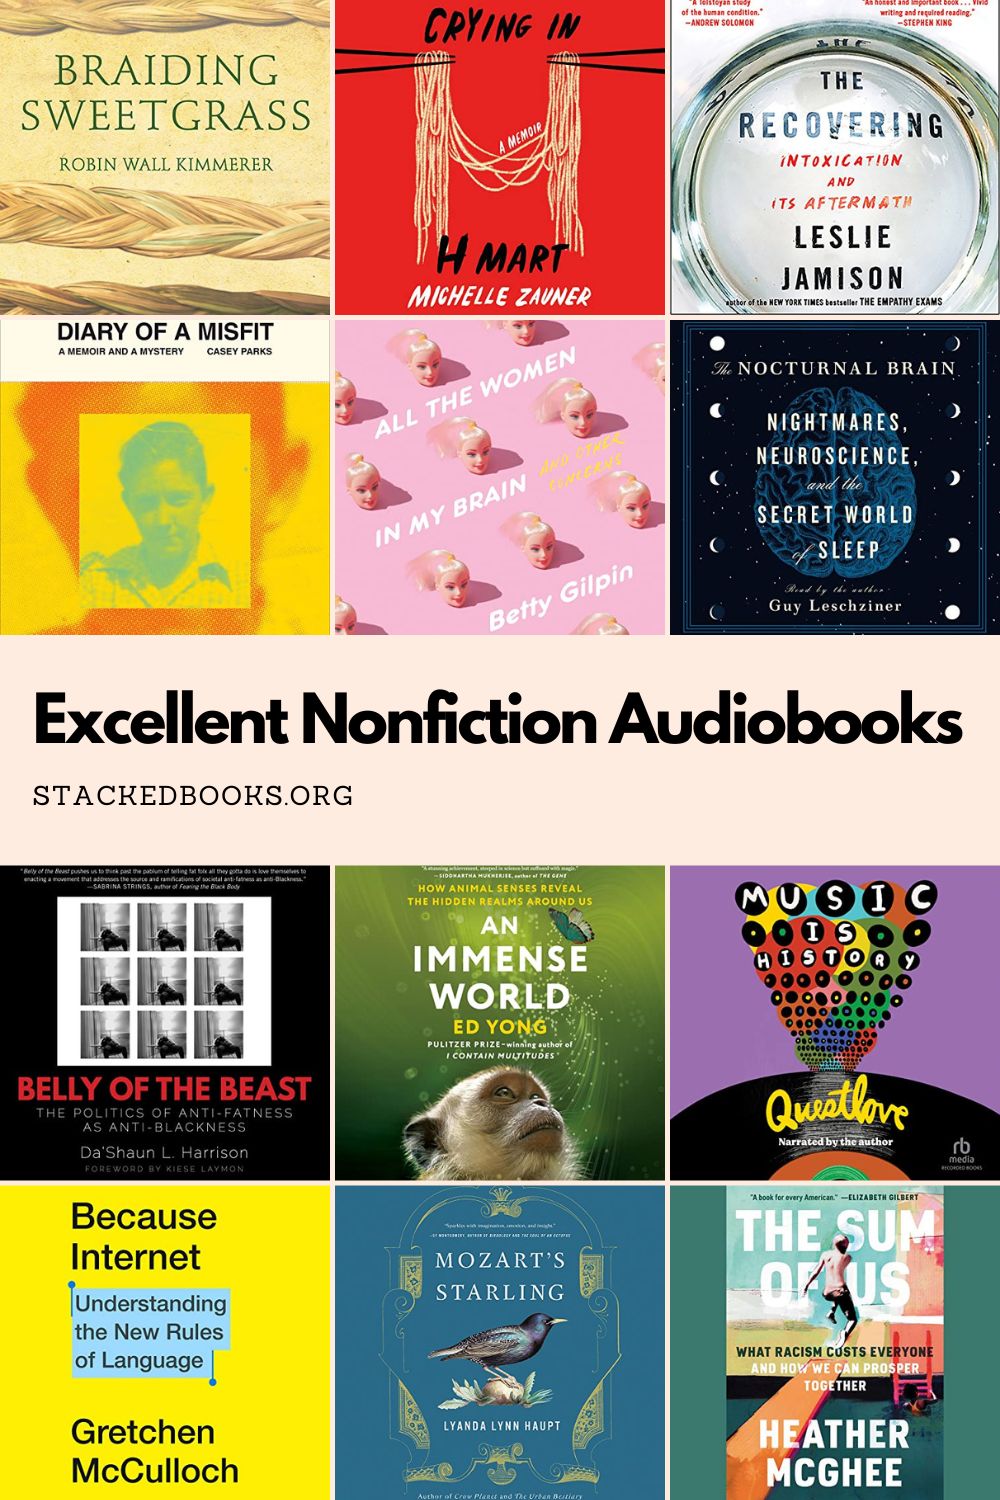 Are there any audiobook review websites for non-fiction books?